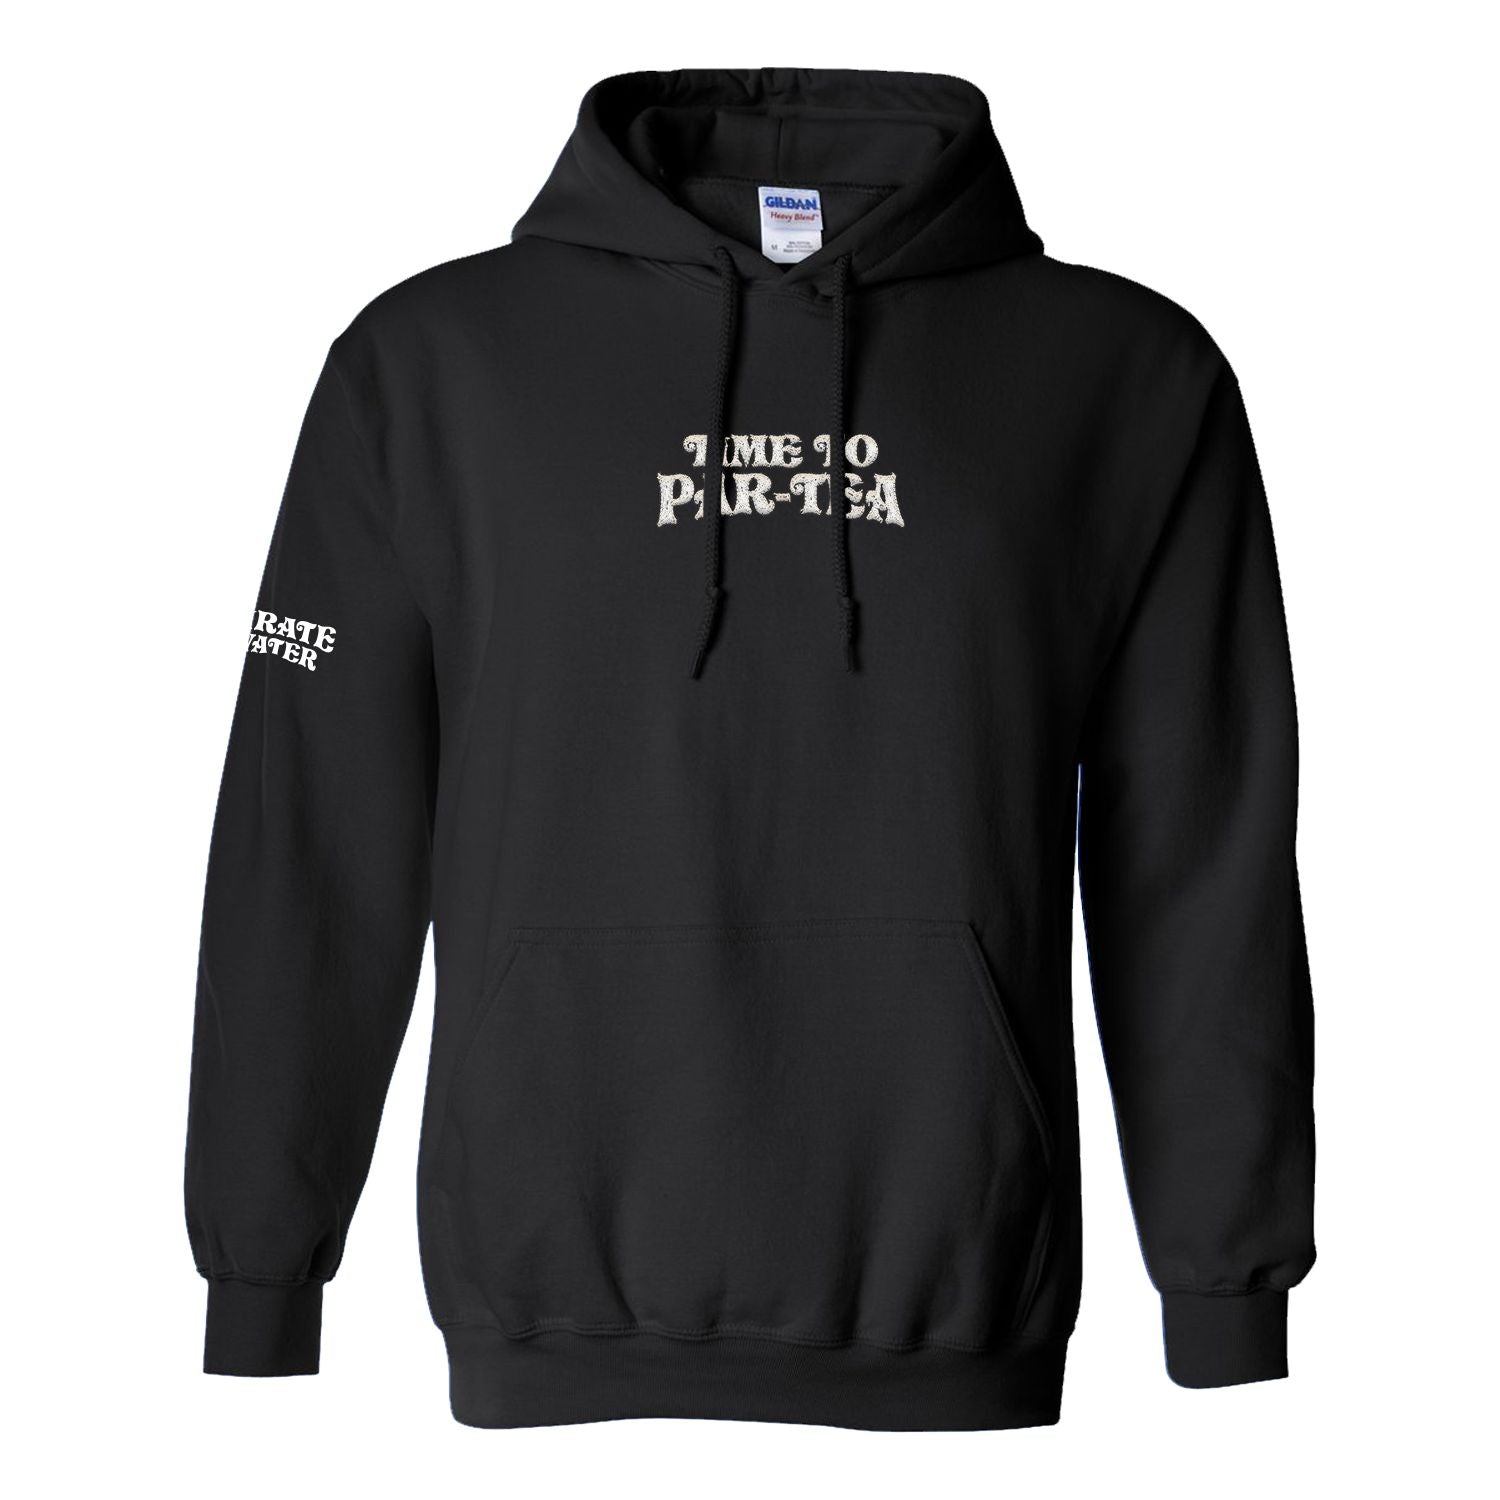 Time To Par-Tea Embroidered Hoodie